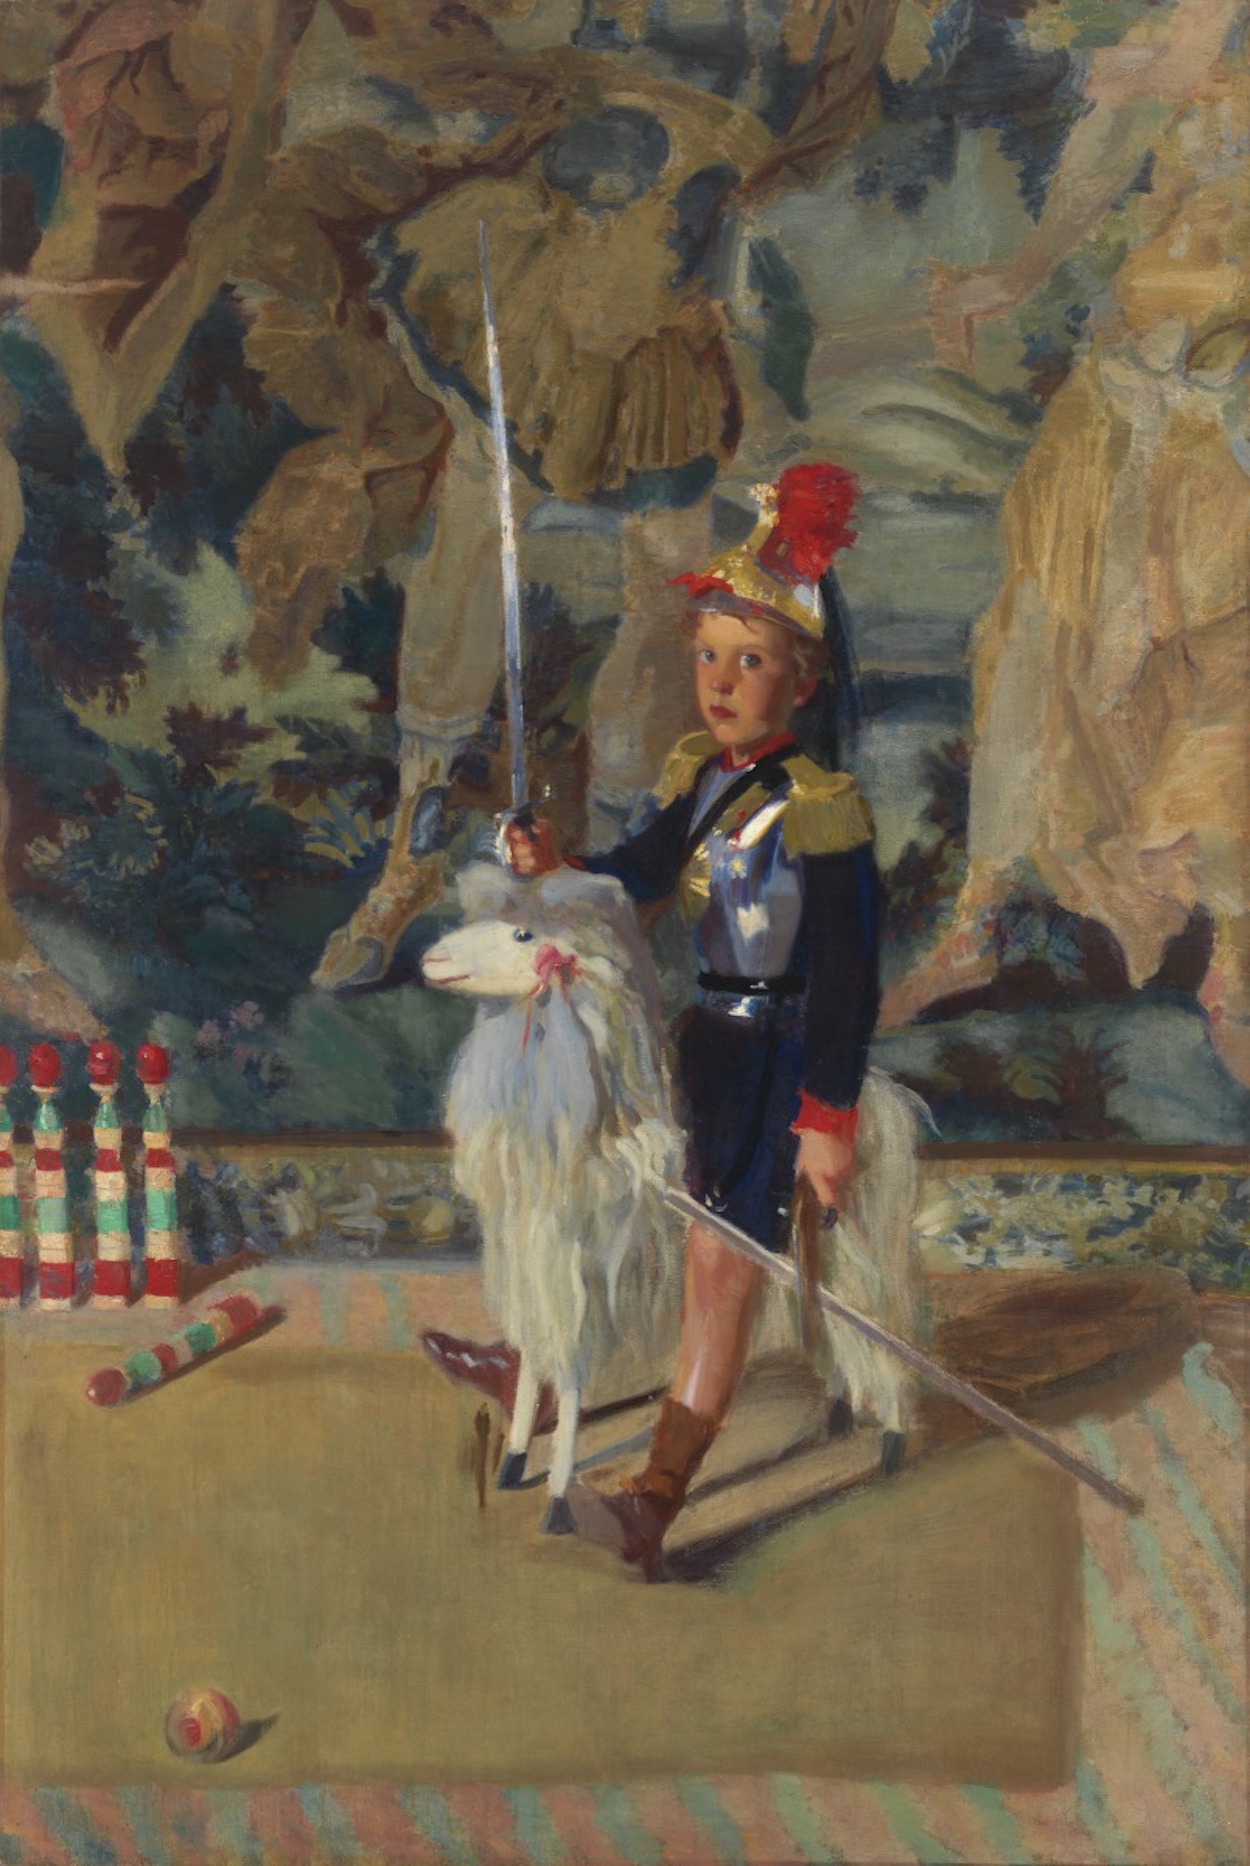 Young Chevalier by Frederick MacMonnies - c. 1898 - 190.82 × 128.59 cm Virginia Museum of Fine Arts